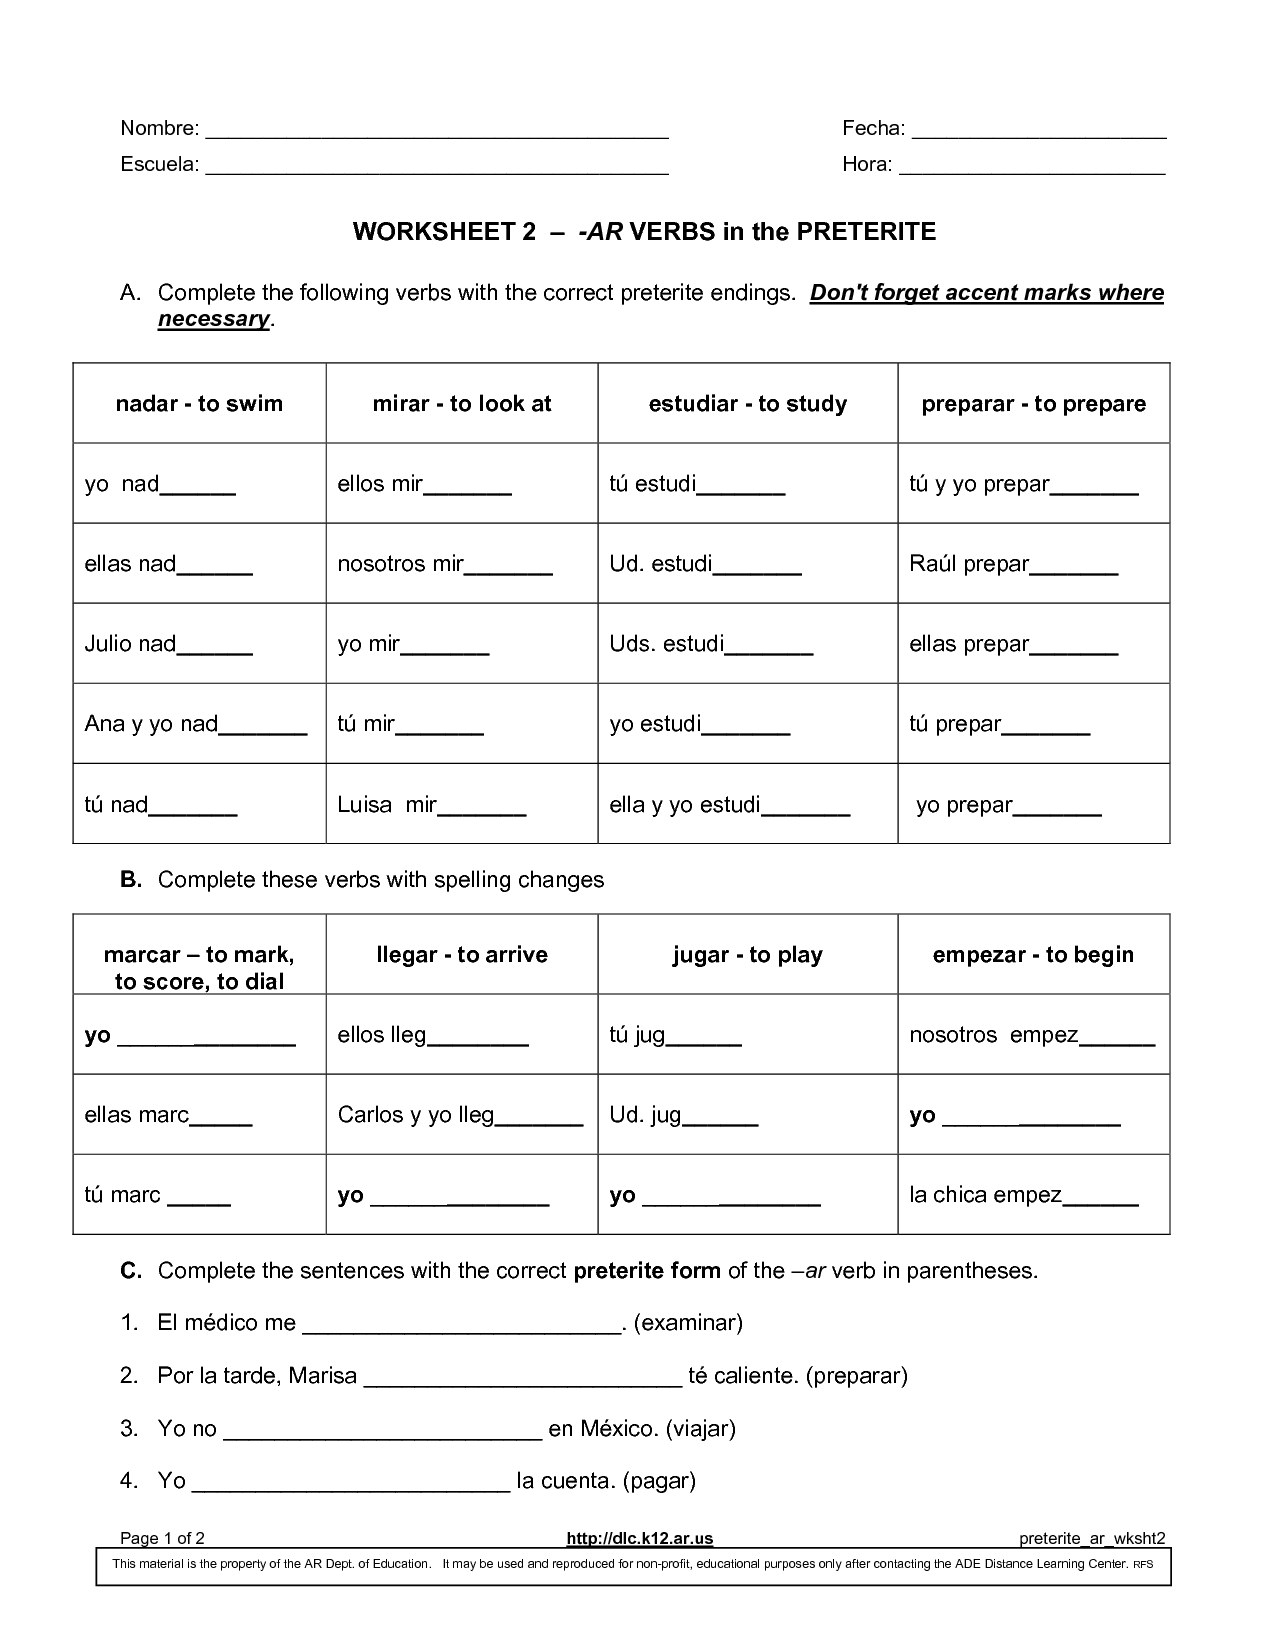 other-worksheet-category-page-676-worksheeto